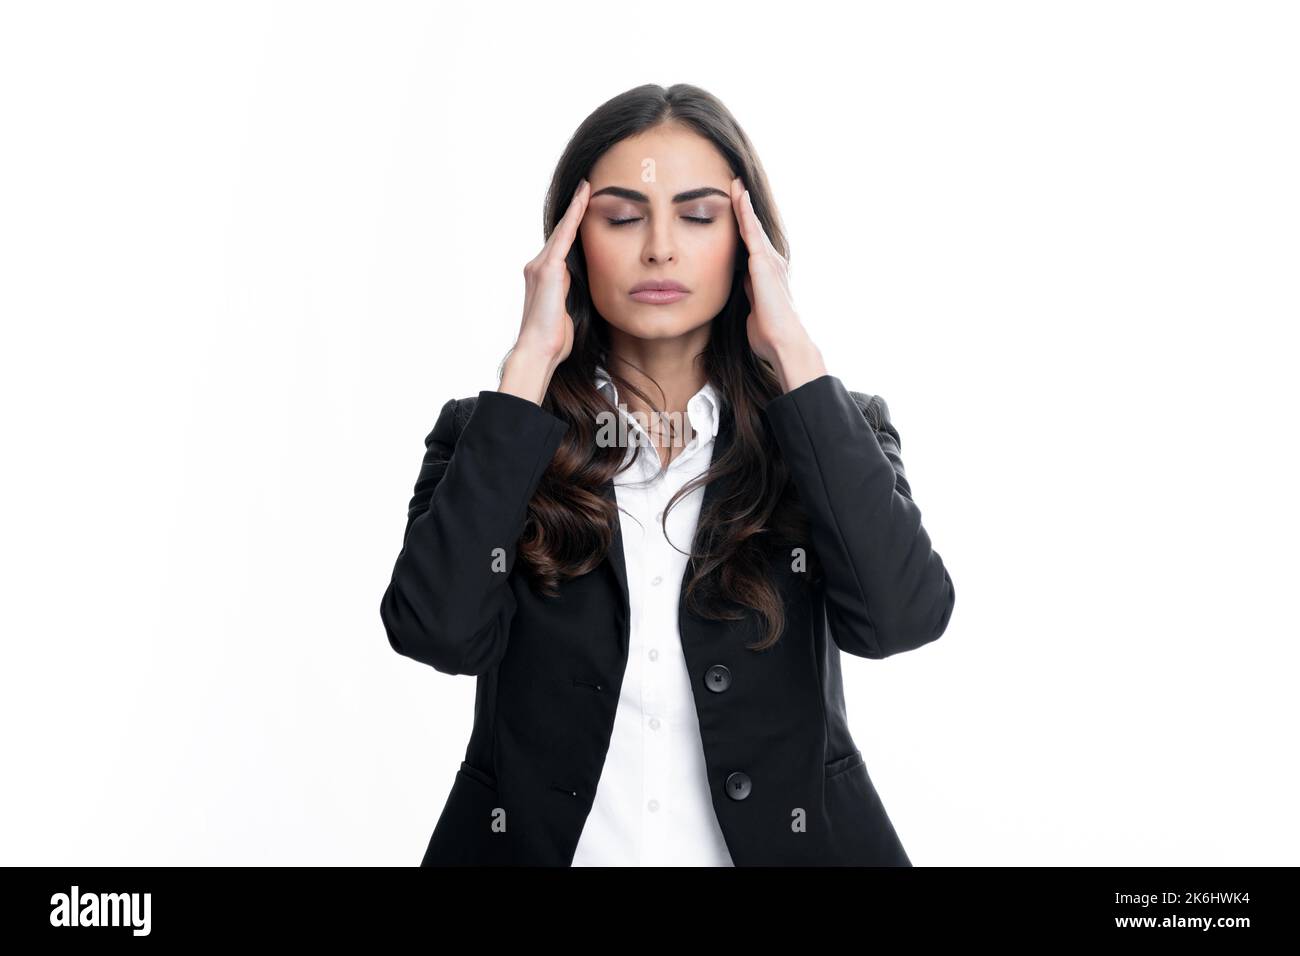 Portrait of young woman feeling stress or strain headache. Female student, young teacher. Upset sad depressed model with hands on head. Stock Photo